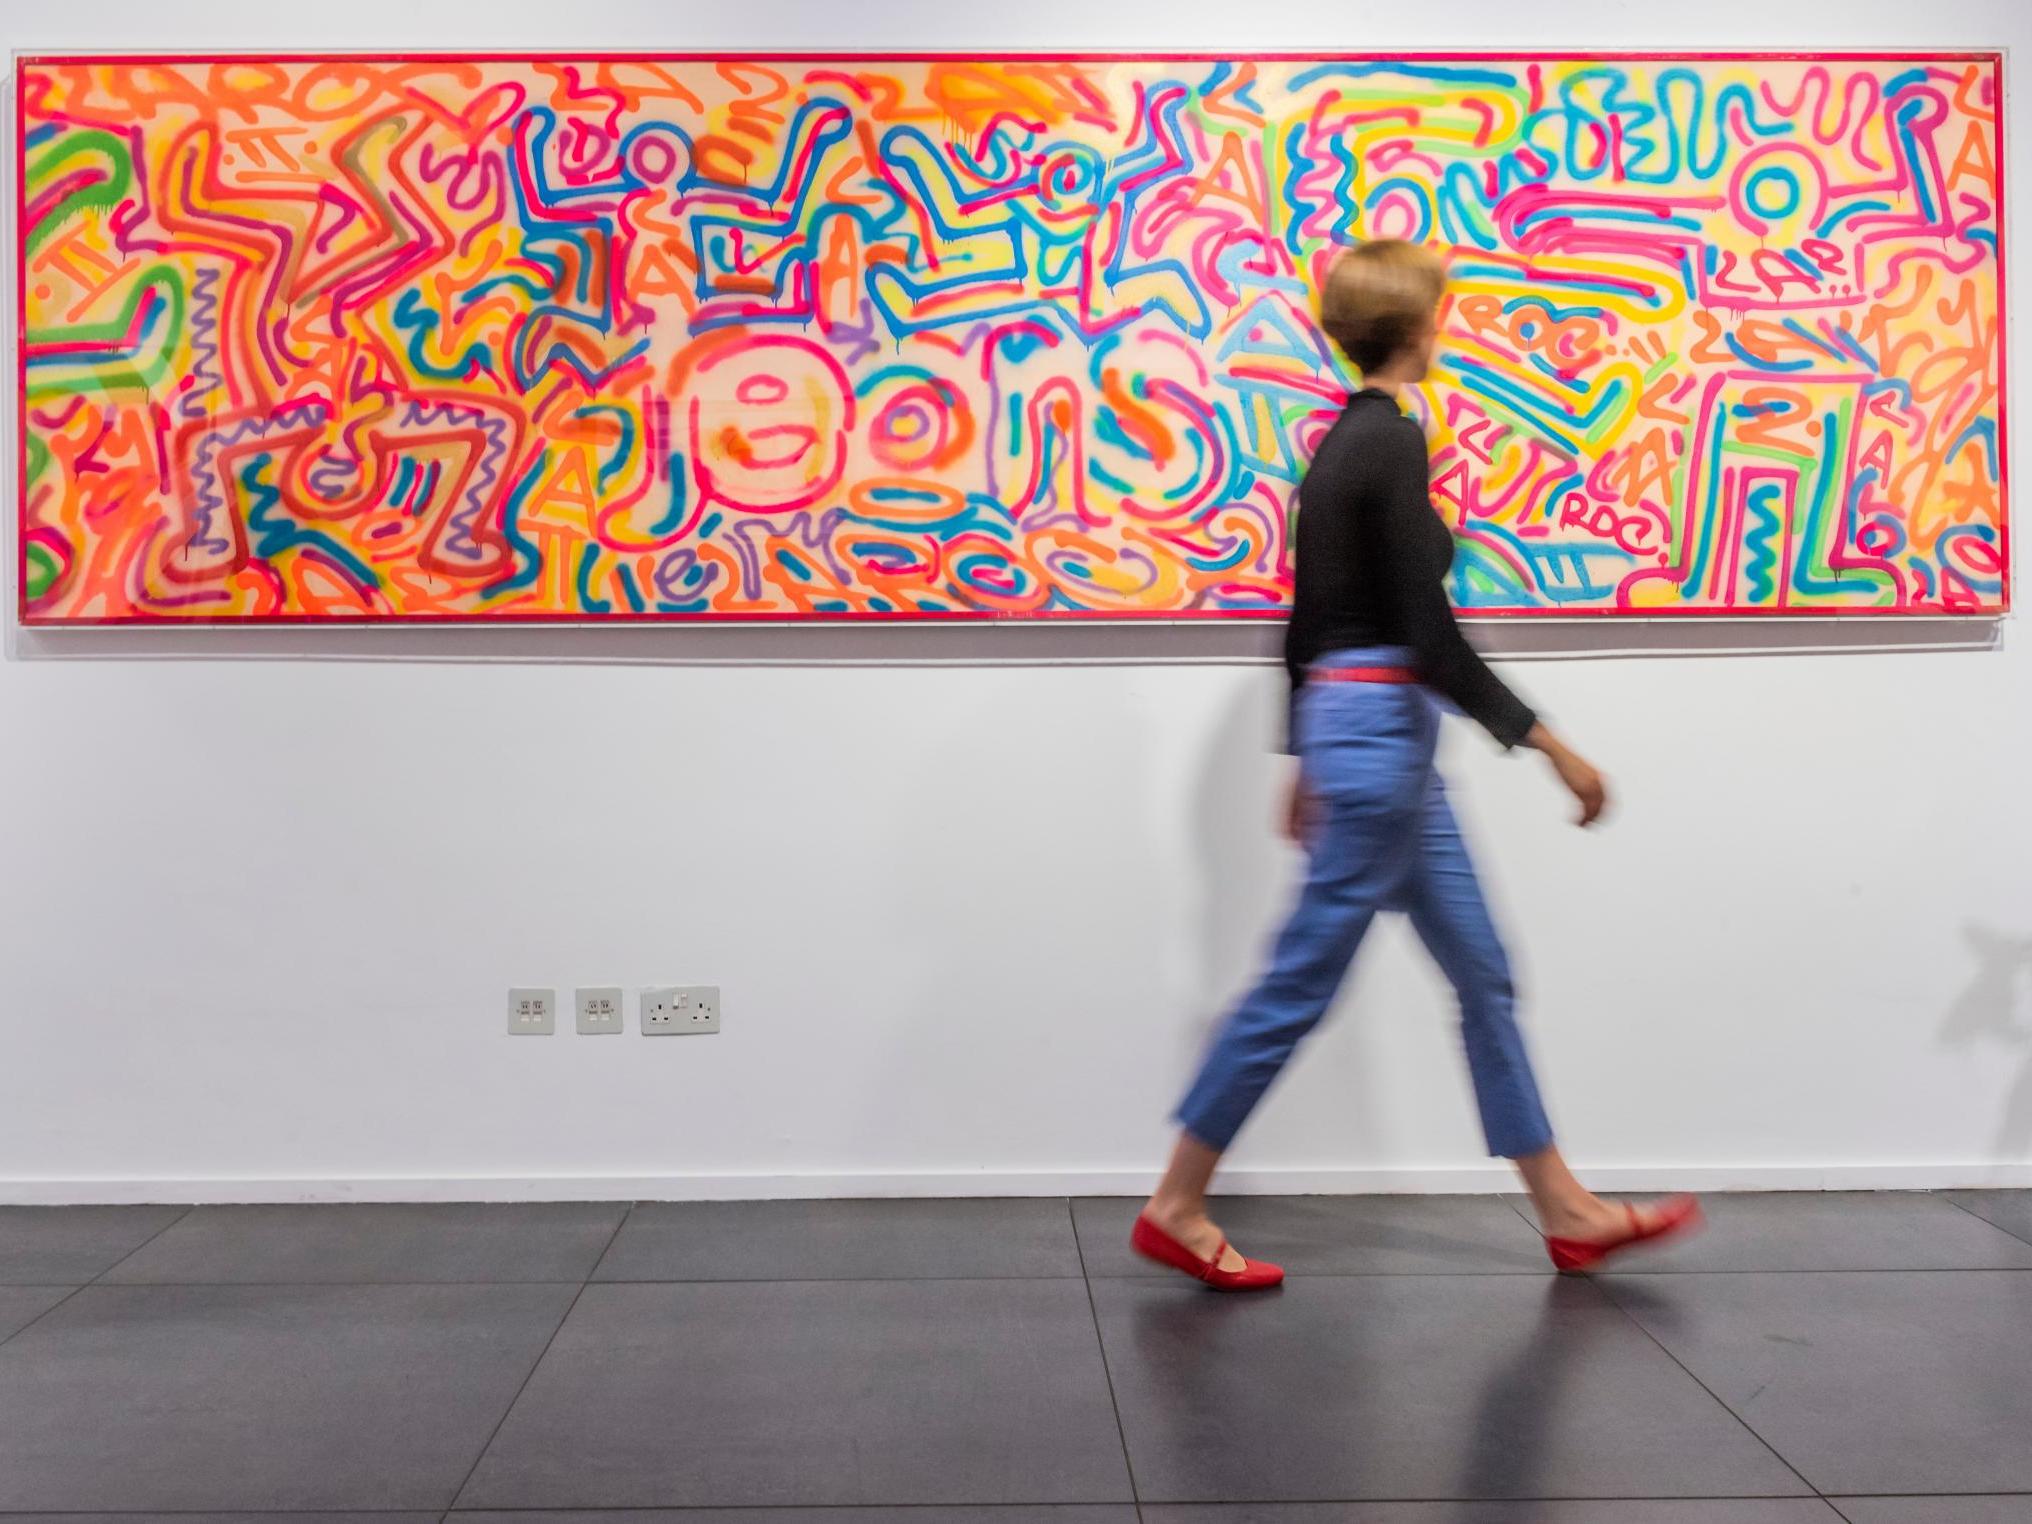 In living colour: Haring’s work celebrated black music and culture